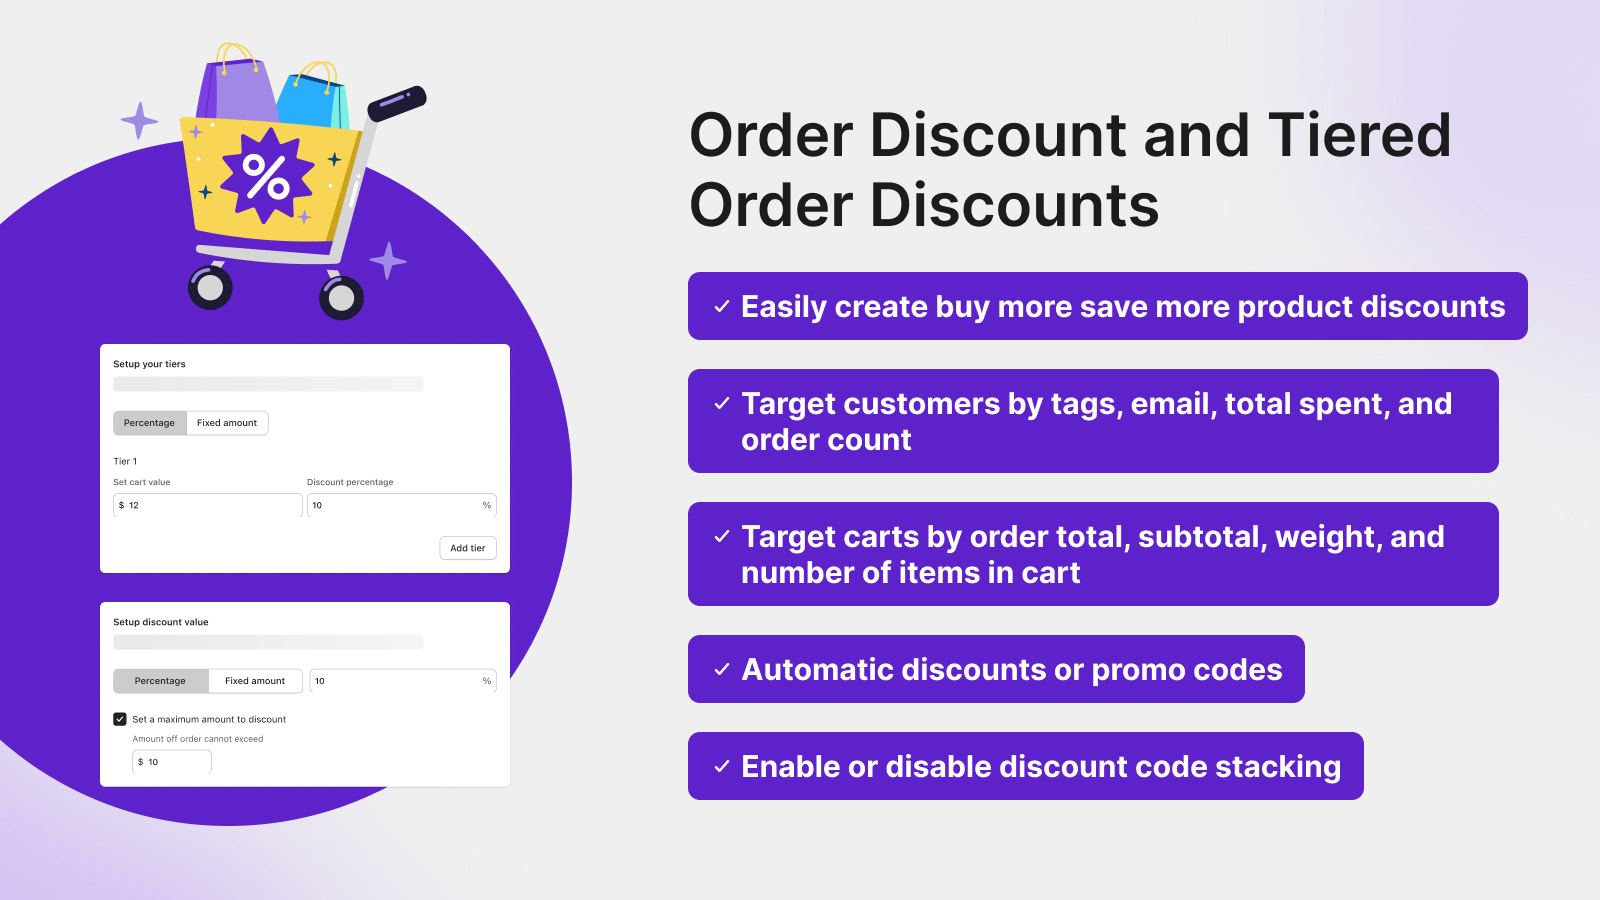 Order and tiered order discounts